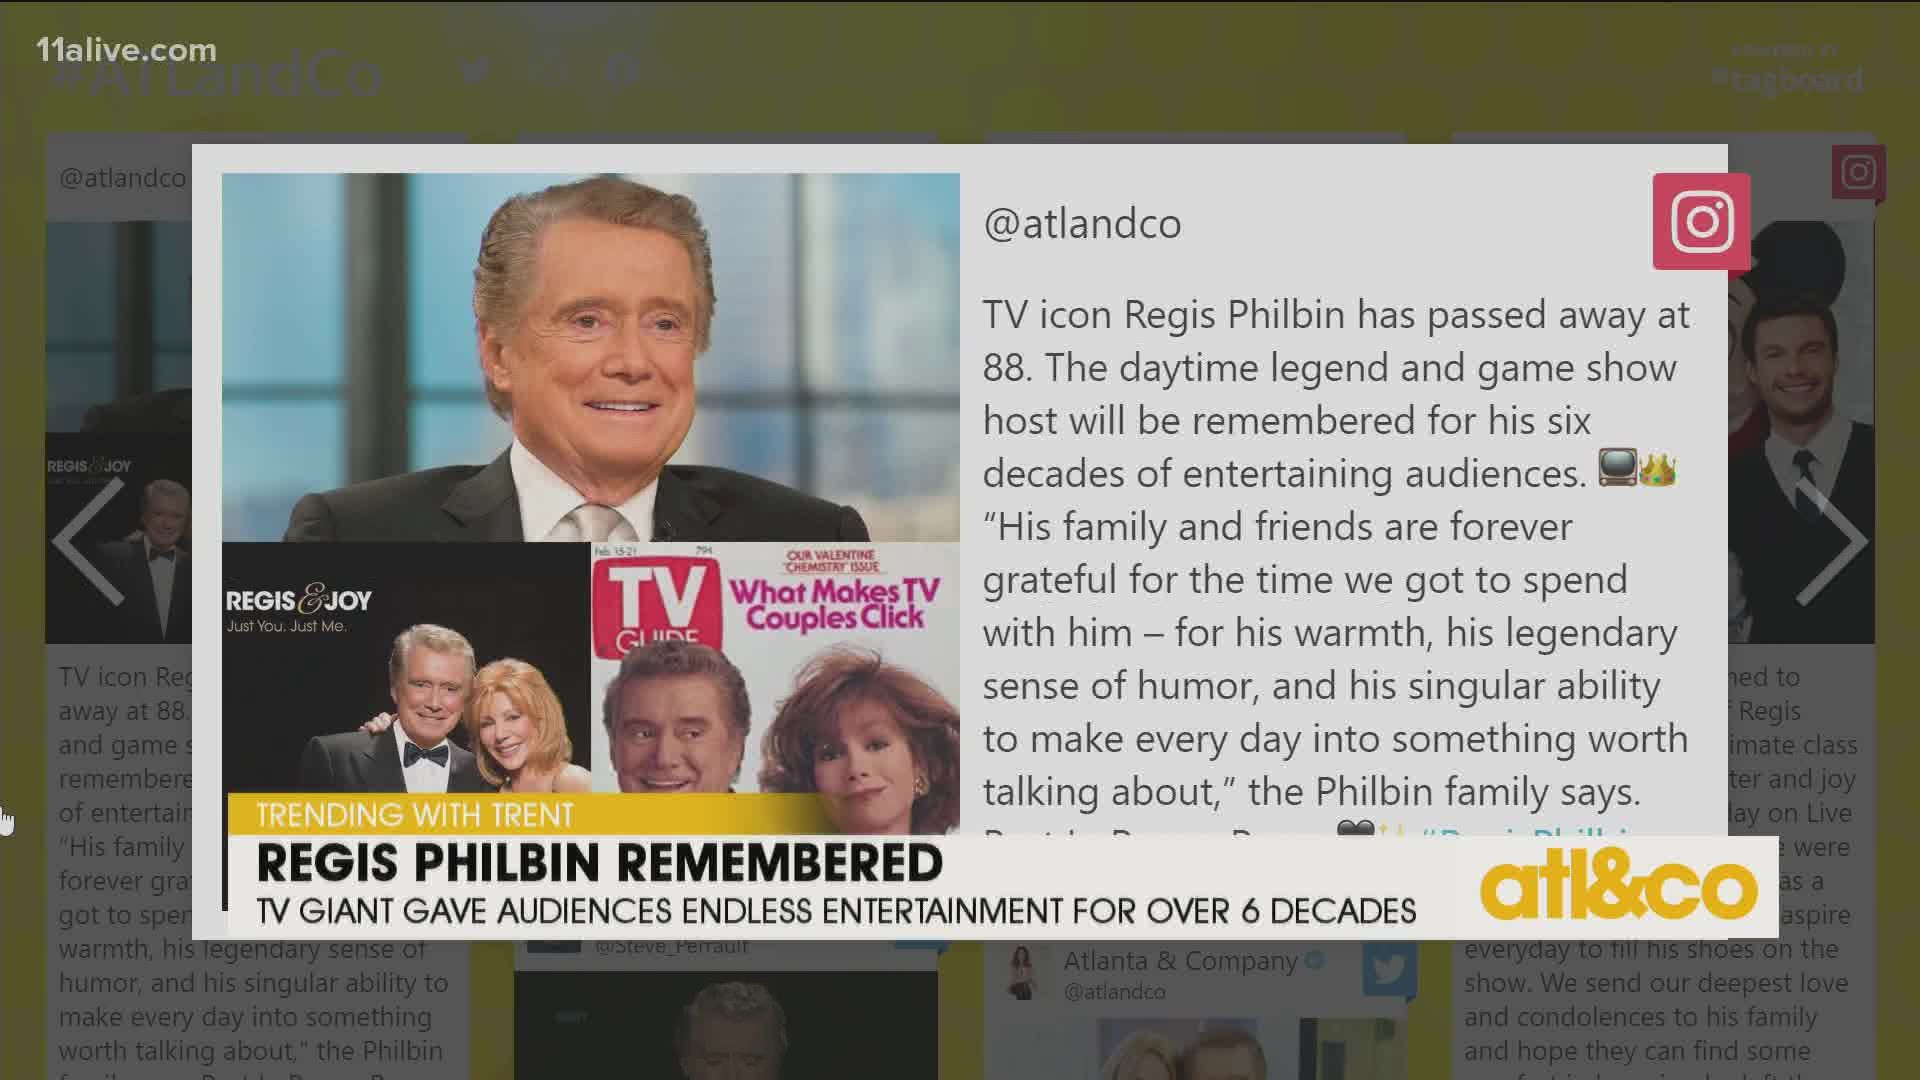 Trending with Trent pays tribute to legendary broadcaster and daytime king Regis Philbin. We'll so miss you, Reeg! Rest In Power.